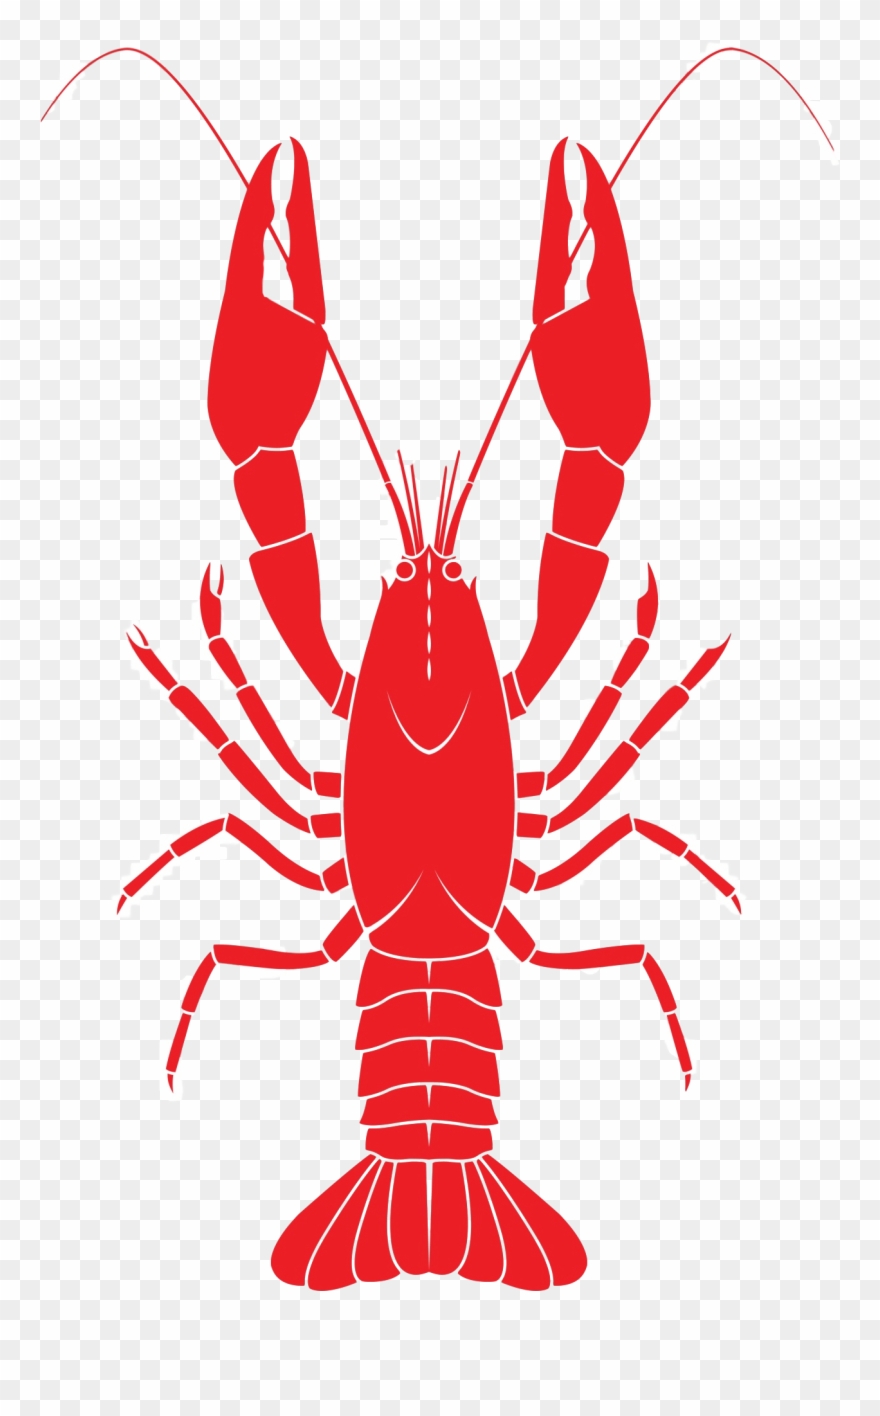 Lobster For Taiapure - Vector Crawfish Clip Art - Png Download 